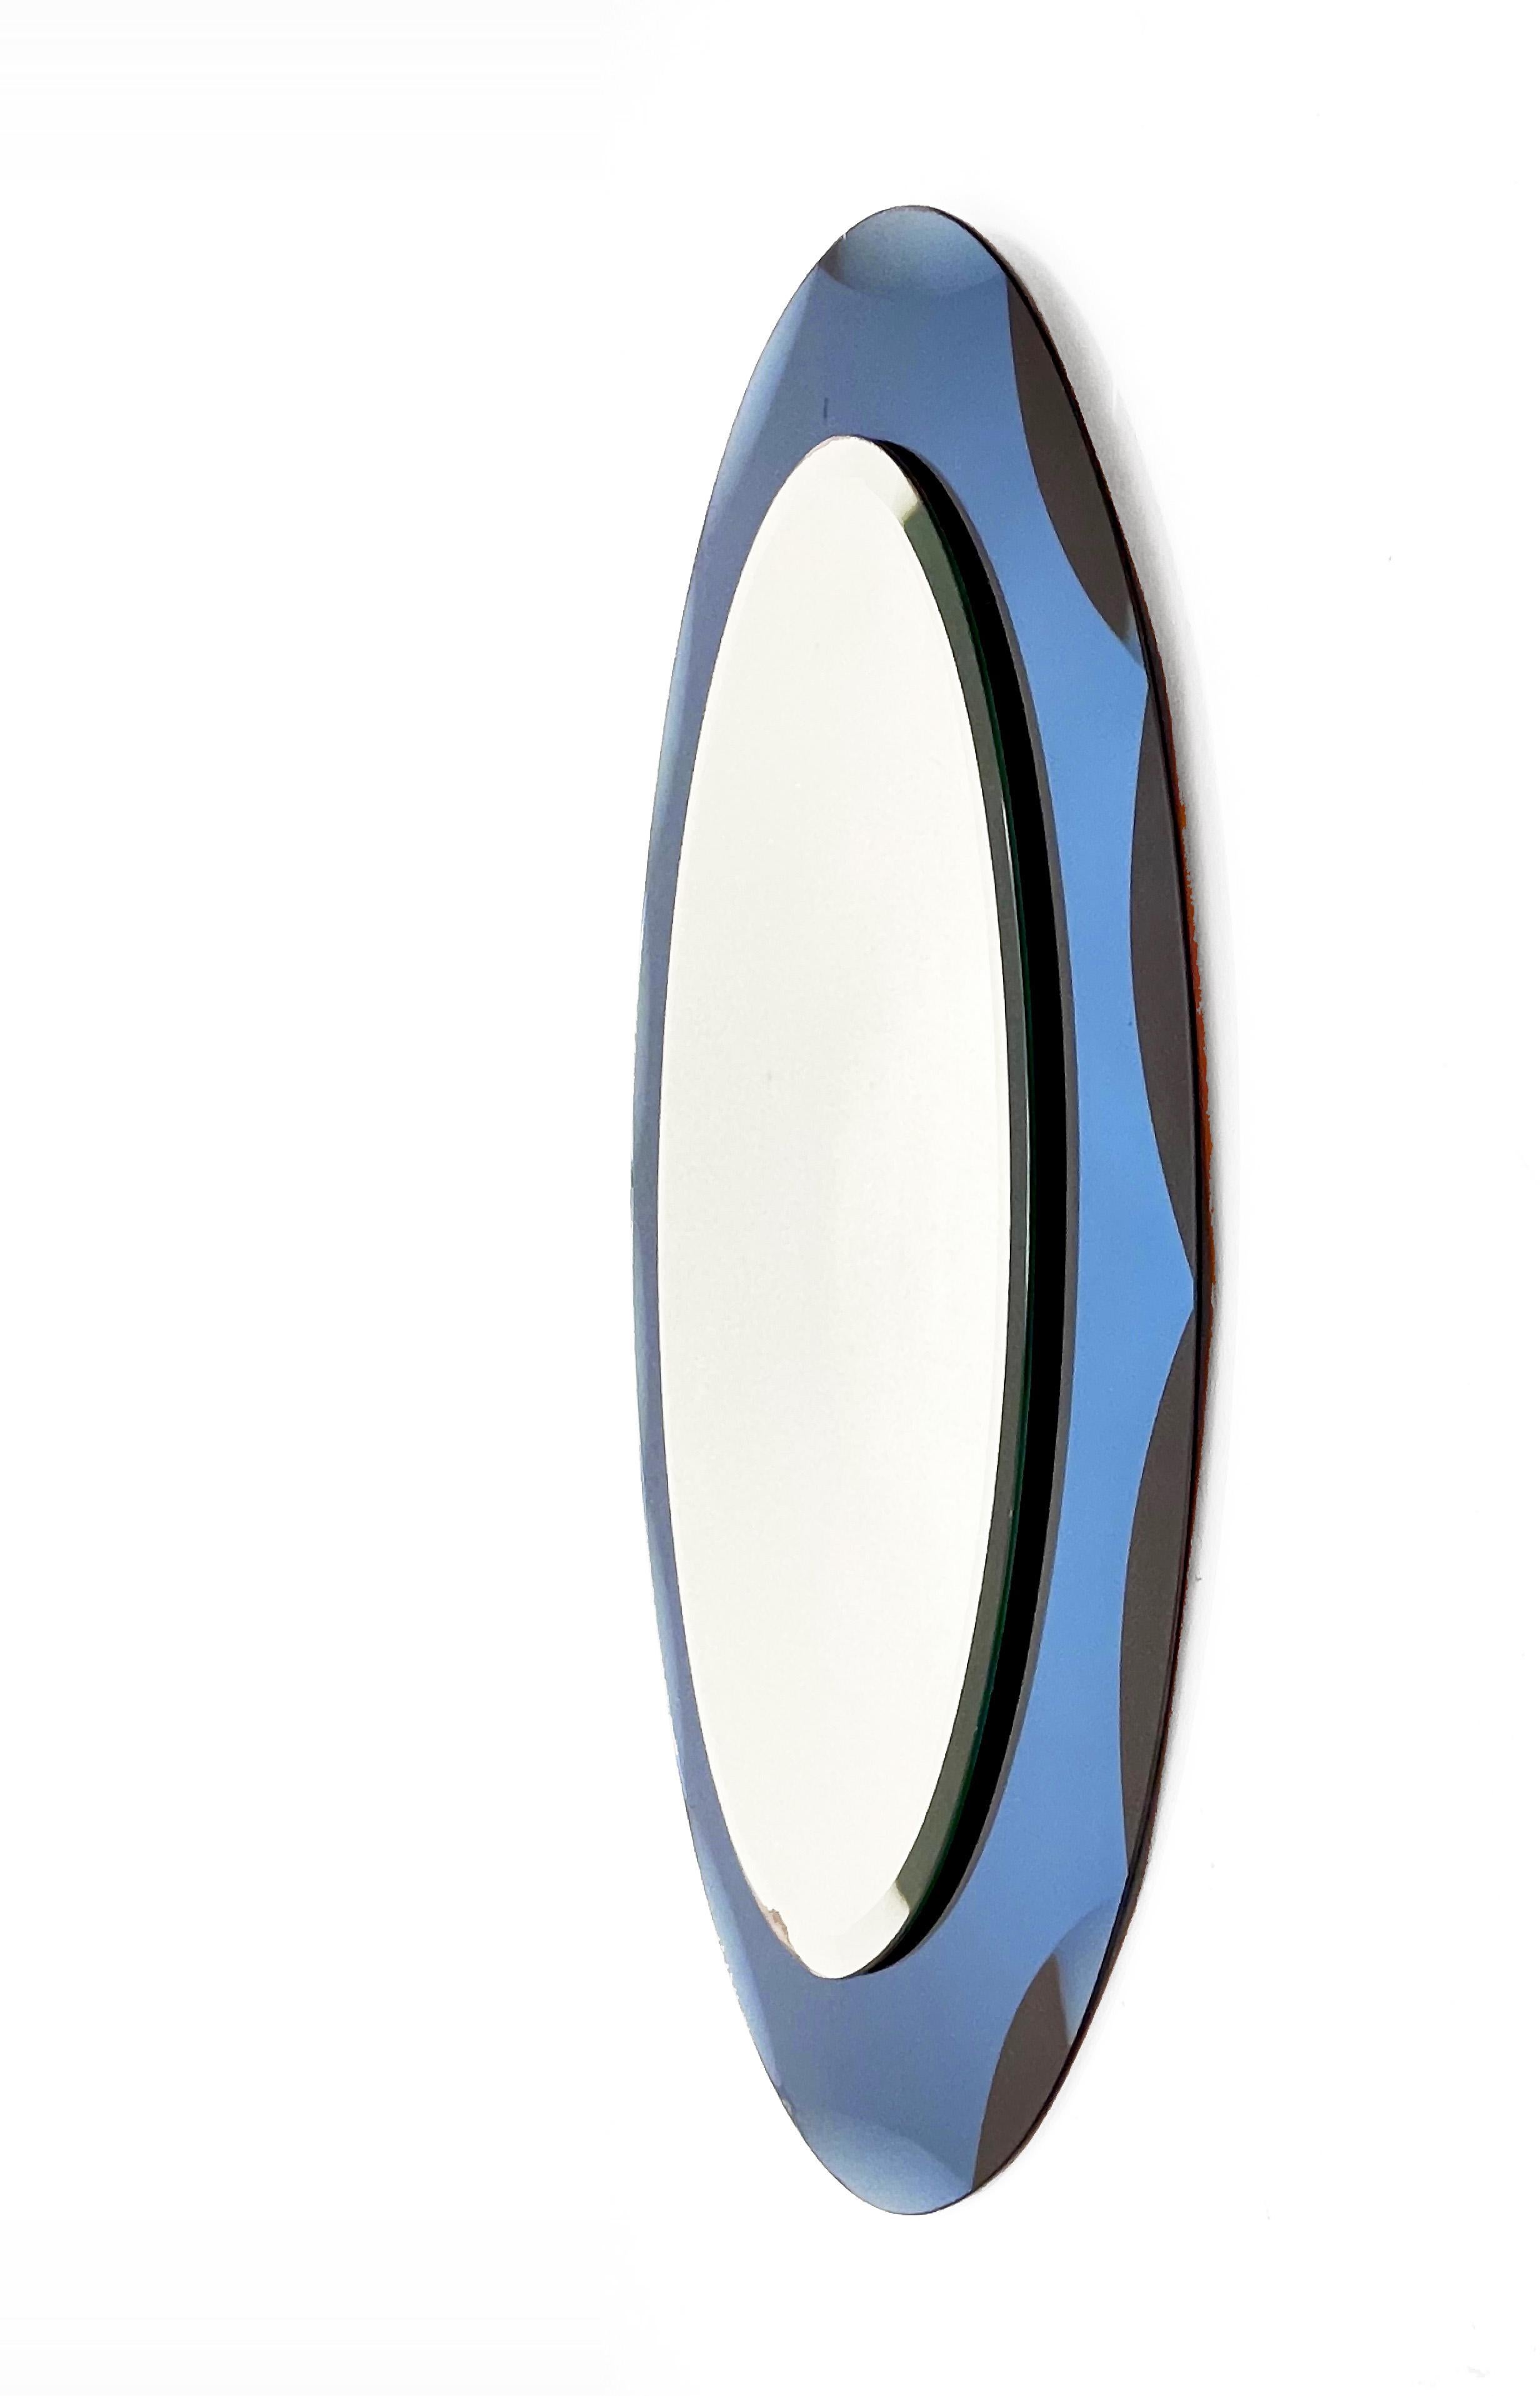 Beautiful midcentury oval mirror with blue graven frame. This Italian mirror is in the style of Cristal Arte and was designed in Italy during the 1960s.

This piece is an example of excellent Italian manufacture with a double mirror layer.

The